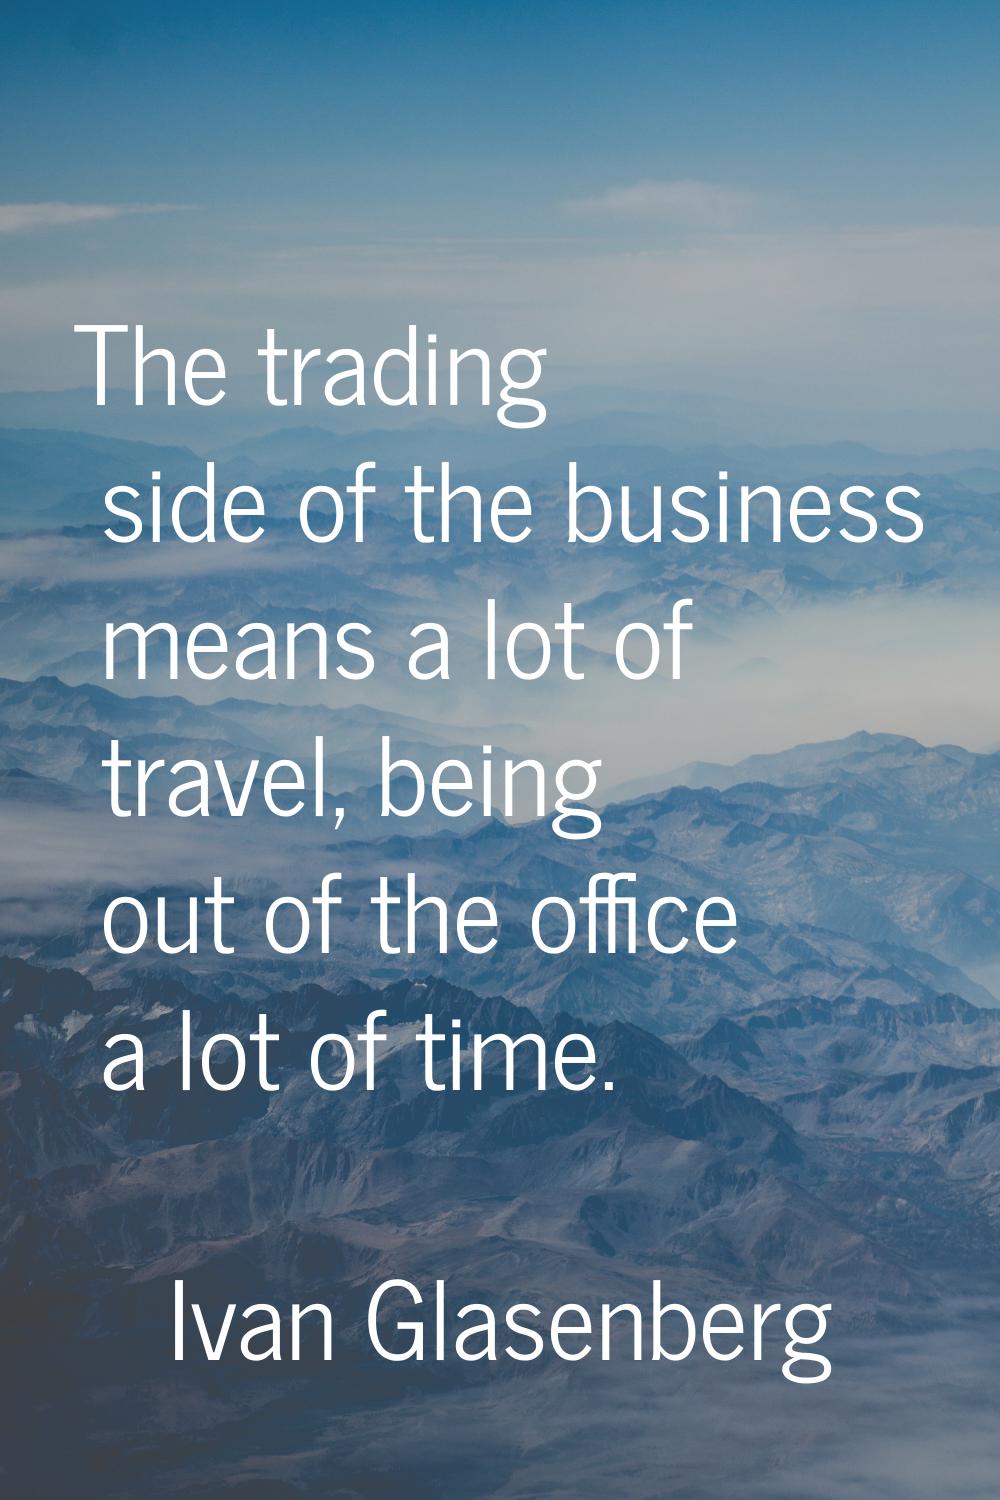 The trading side of the business means a lot of travel, being out of the office a lot of time.